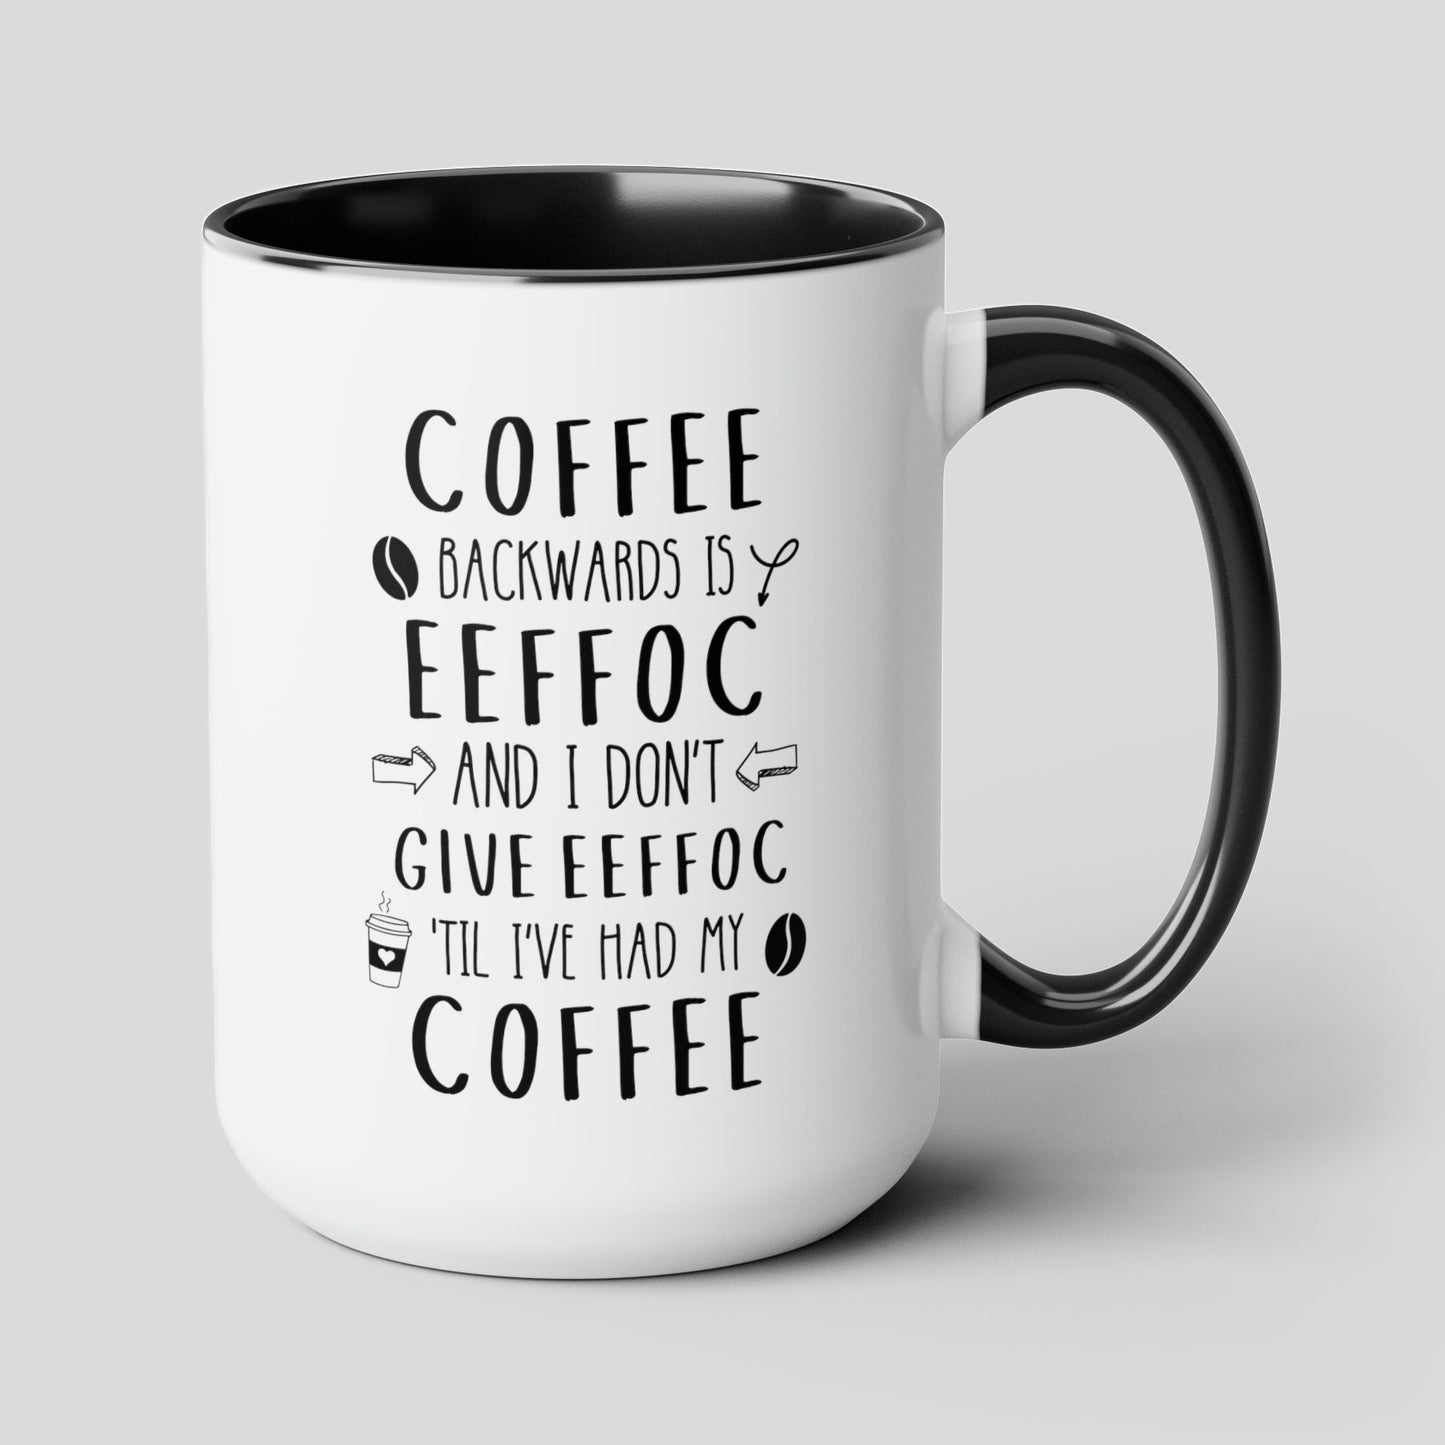 Coffee Backwards Is Eeffoc And I Dont Give Eeffoc Til Ive Had My Coffee 15oz white with black accent funny large coffee mug humor office waveywares wavey wares wavywares wavy wares cover